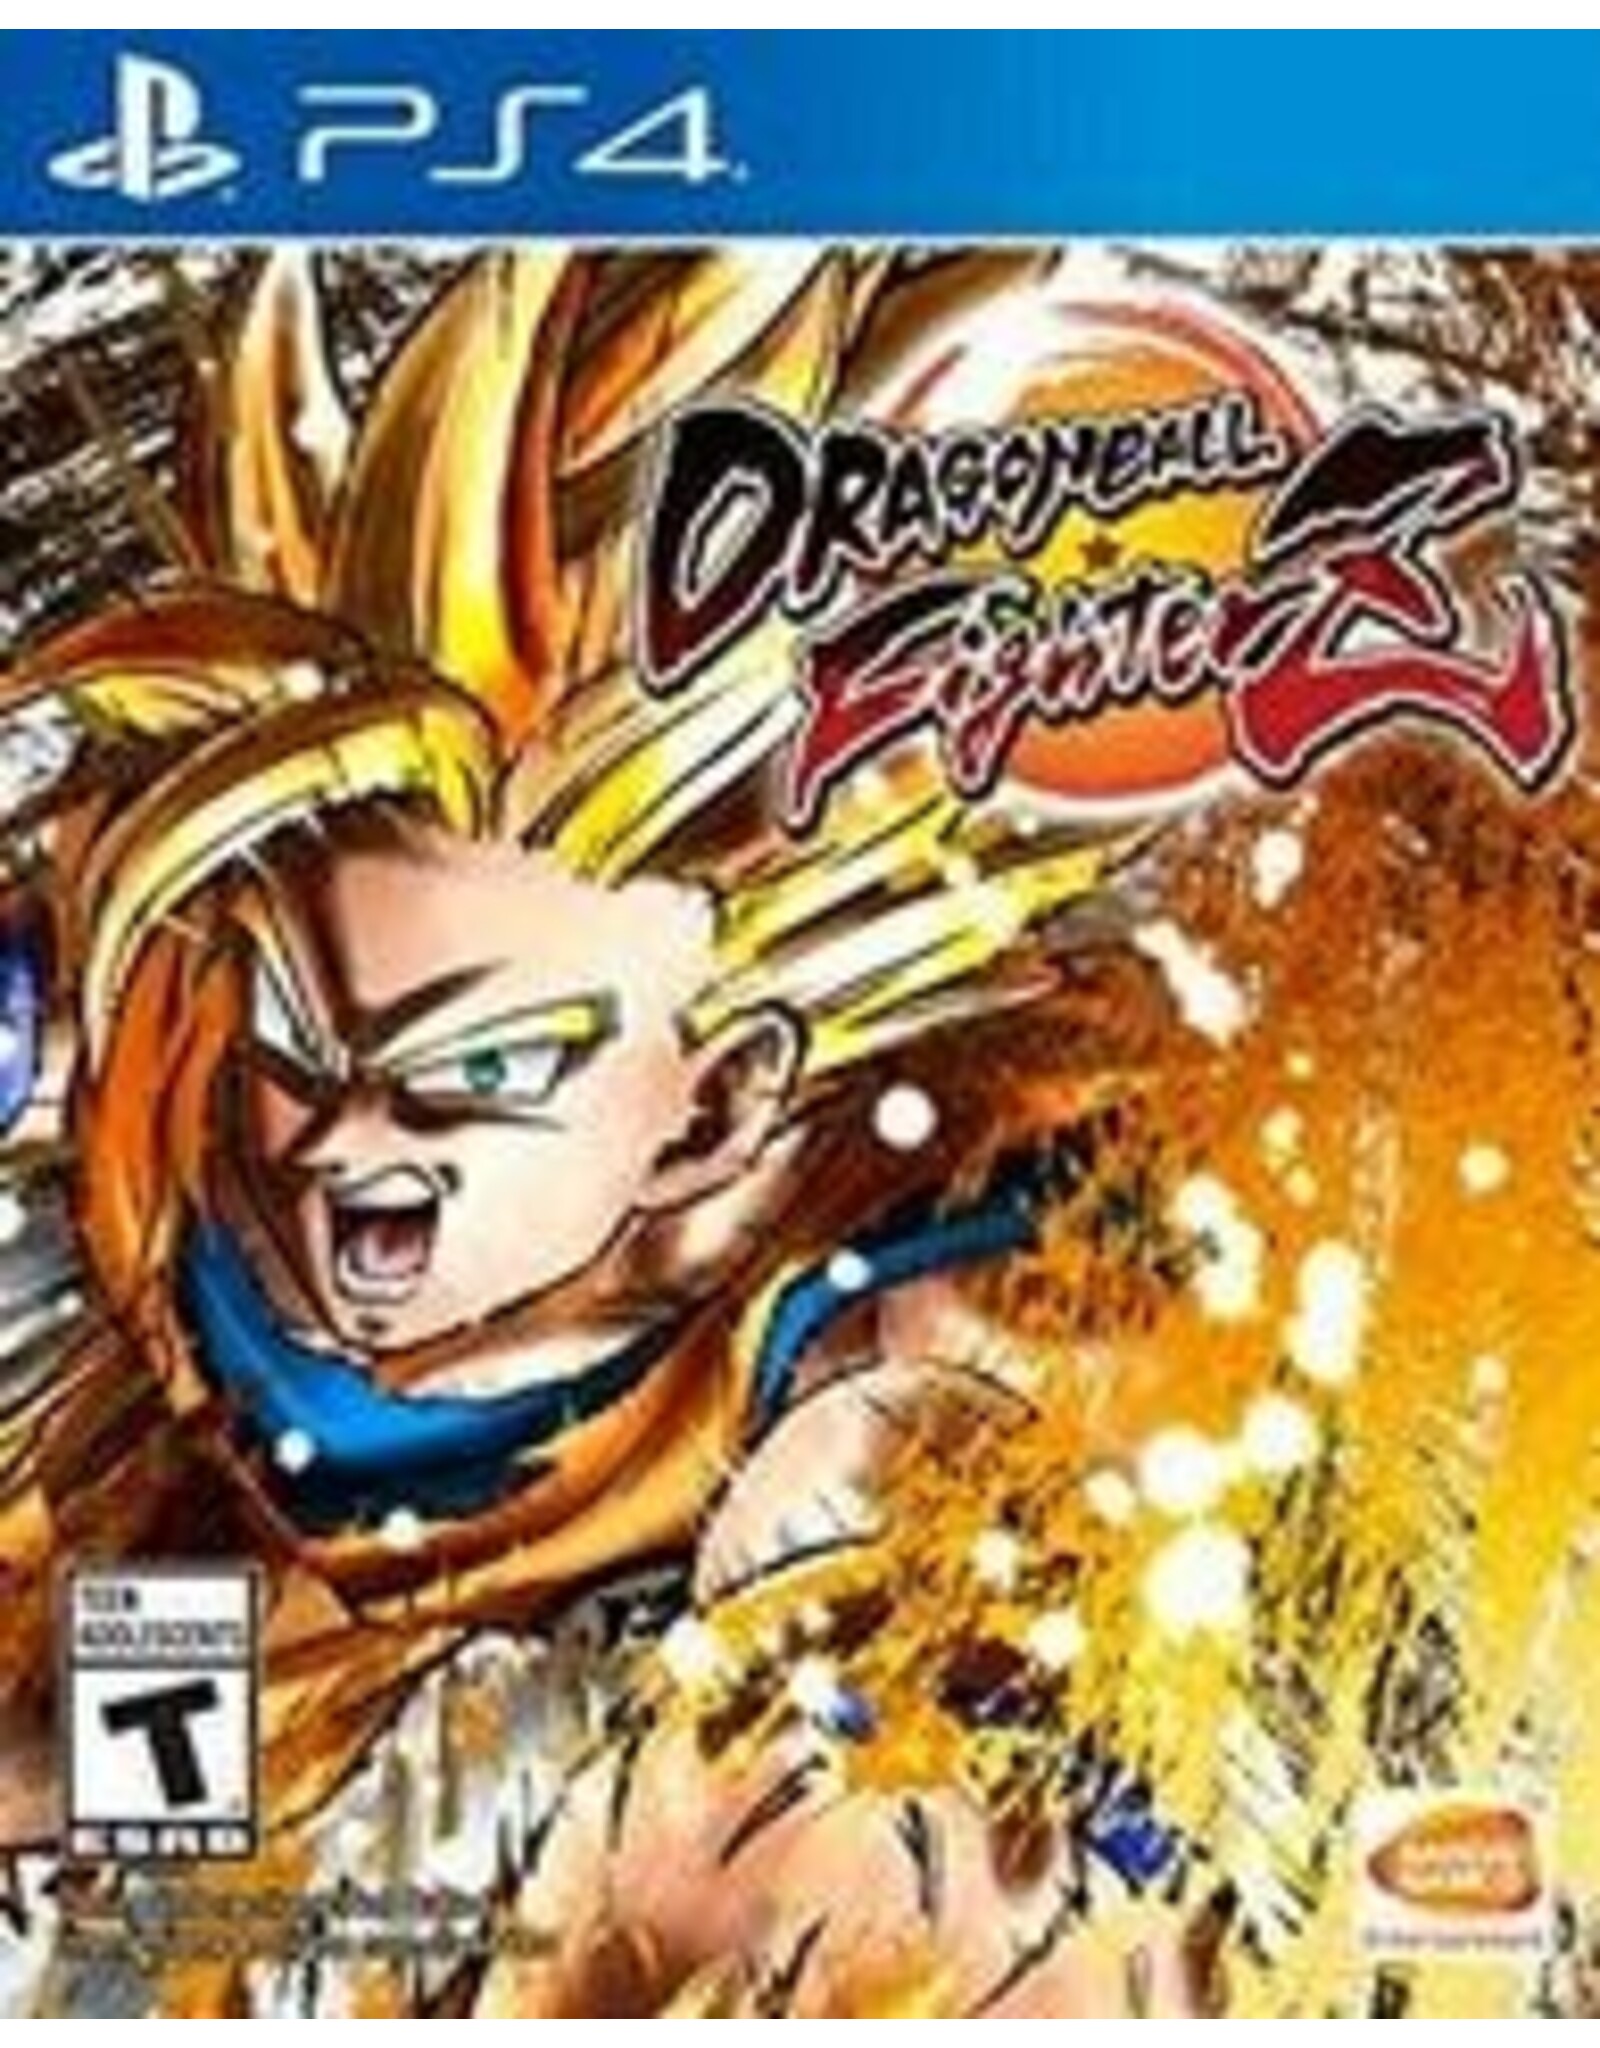 Playstation 4 Dragon Ball Fighter Z (Used)